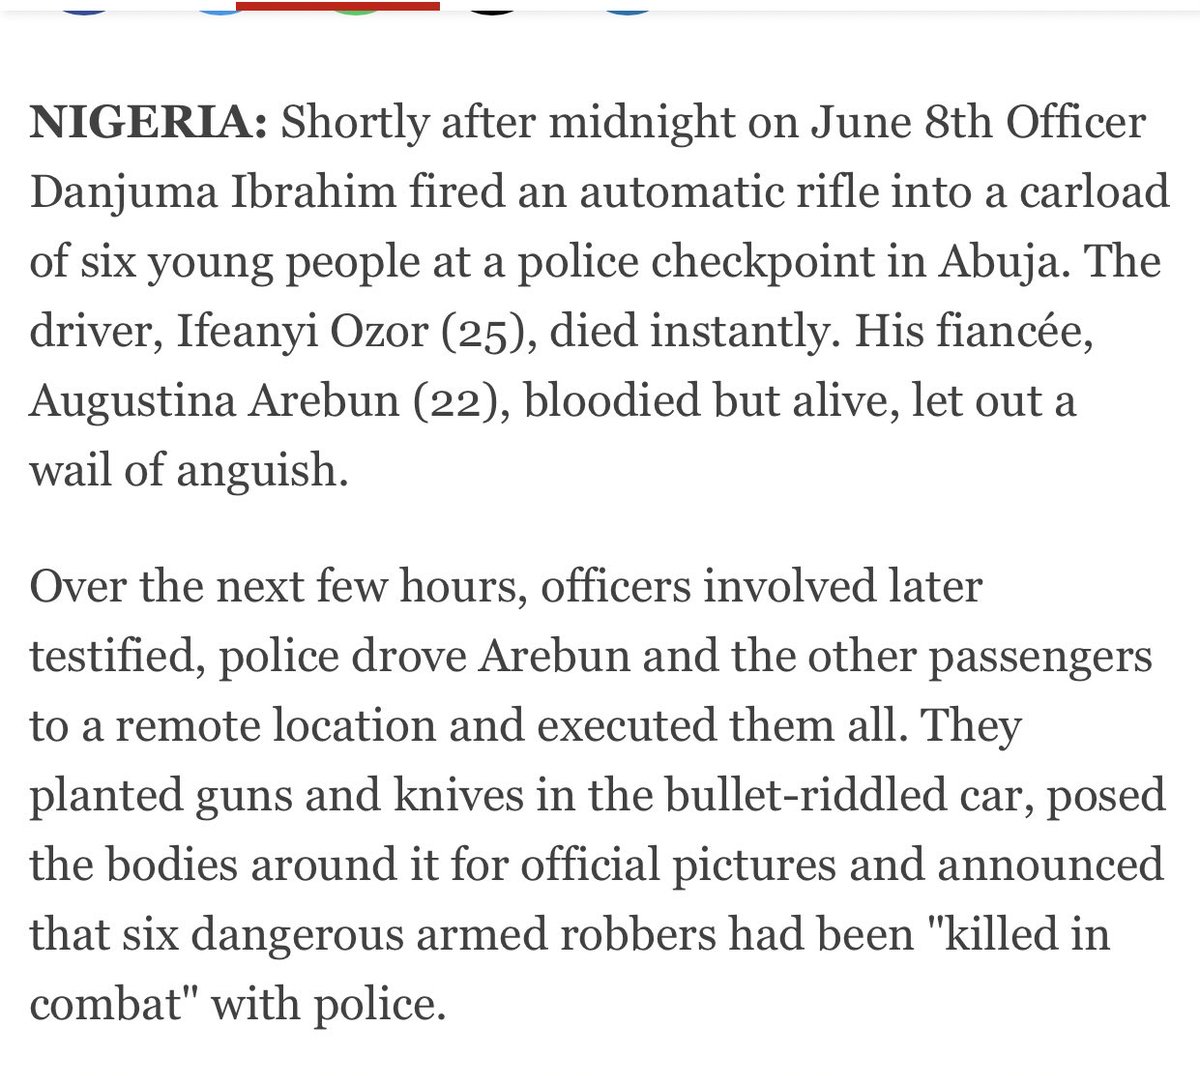 IFEANYI OZOR. 25. One of the 6 that died when an officer shot at a carload of 6 people. He was with his fiancé. IFEANYI died instantly. The remaining 5 were taken to a remote location and executed! 2005SAY HIS NAME  #EndSARS  